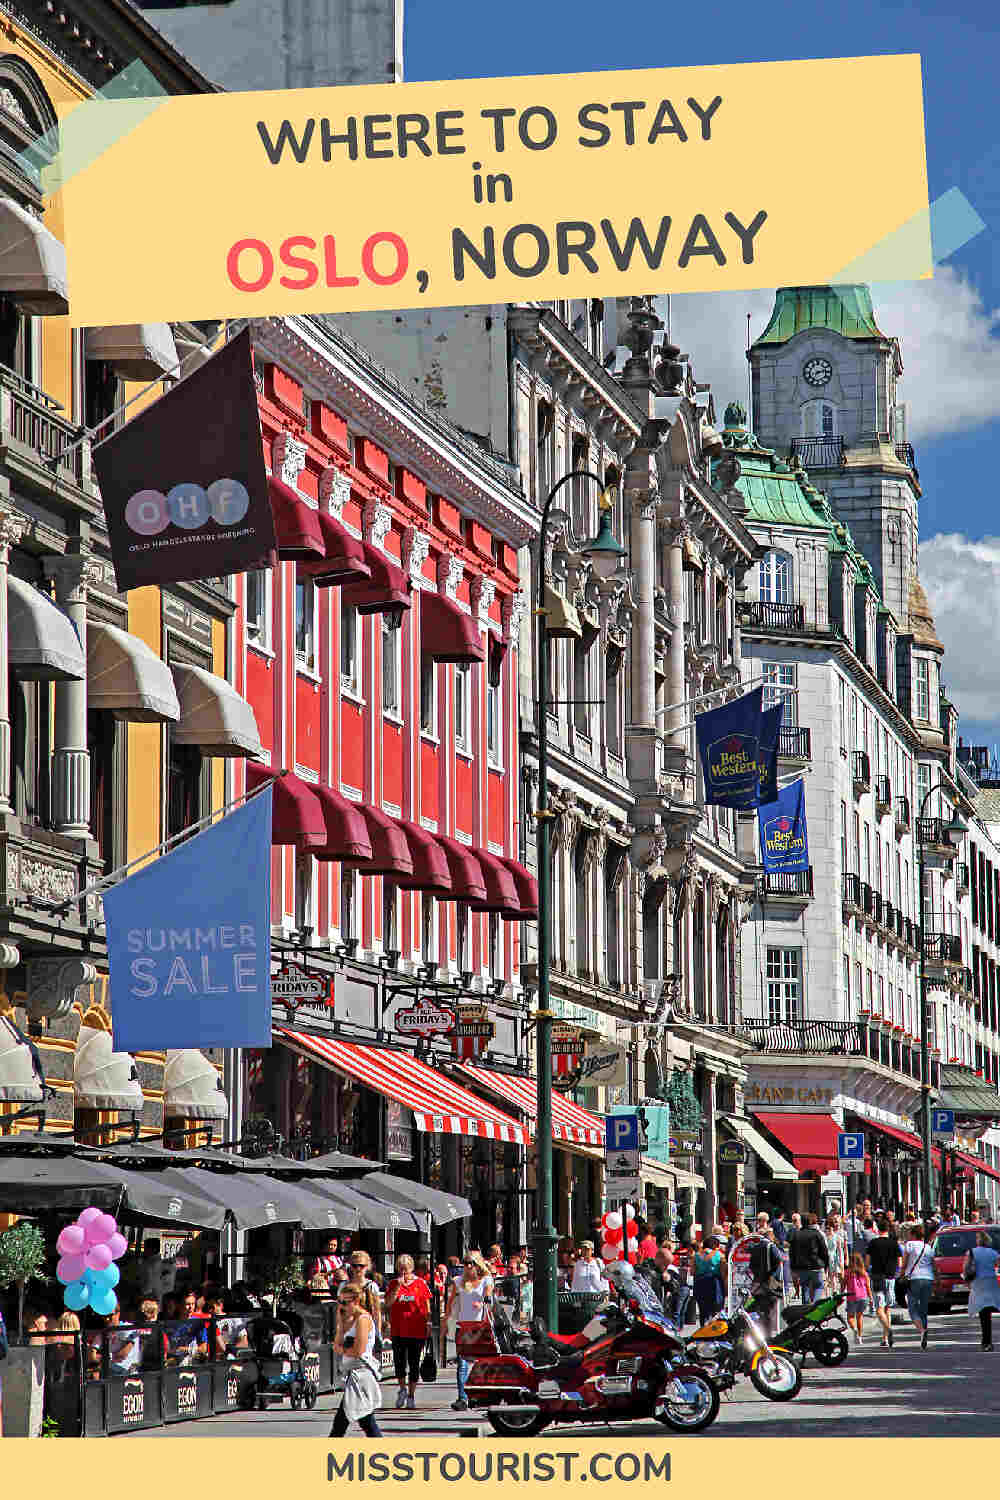 colorful street scene from Oslo, Norway